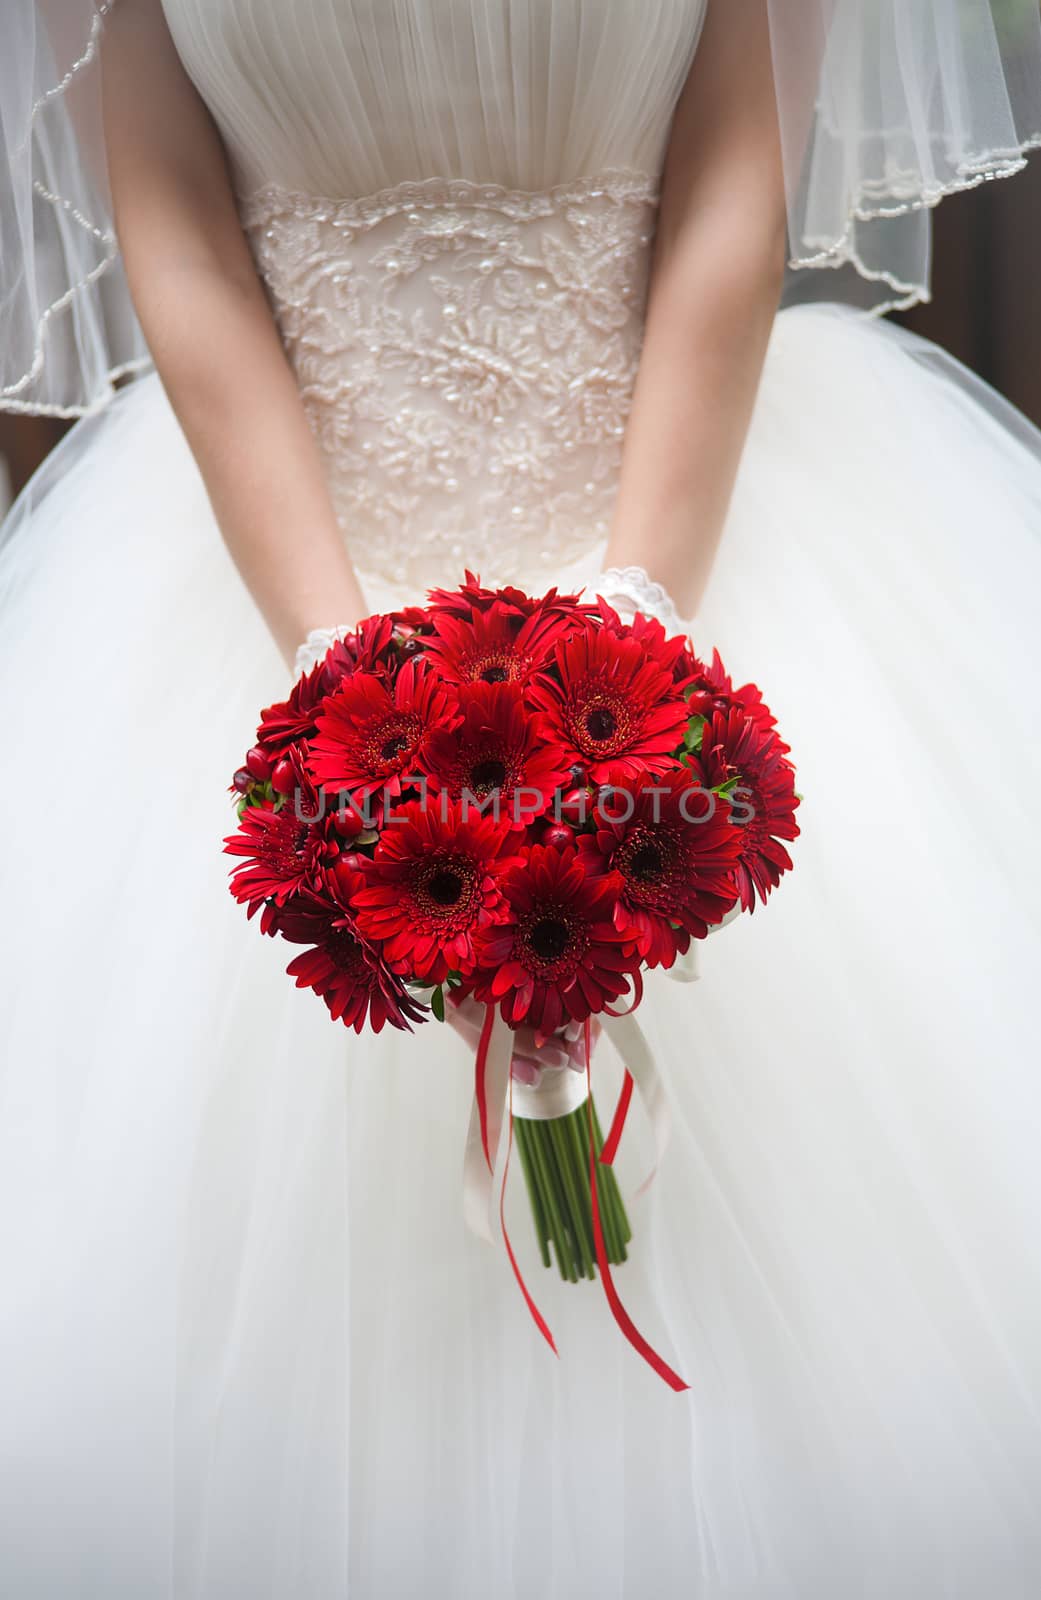 Wedding bouquet in hands of the bride. Red chrysanthemums